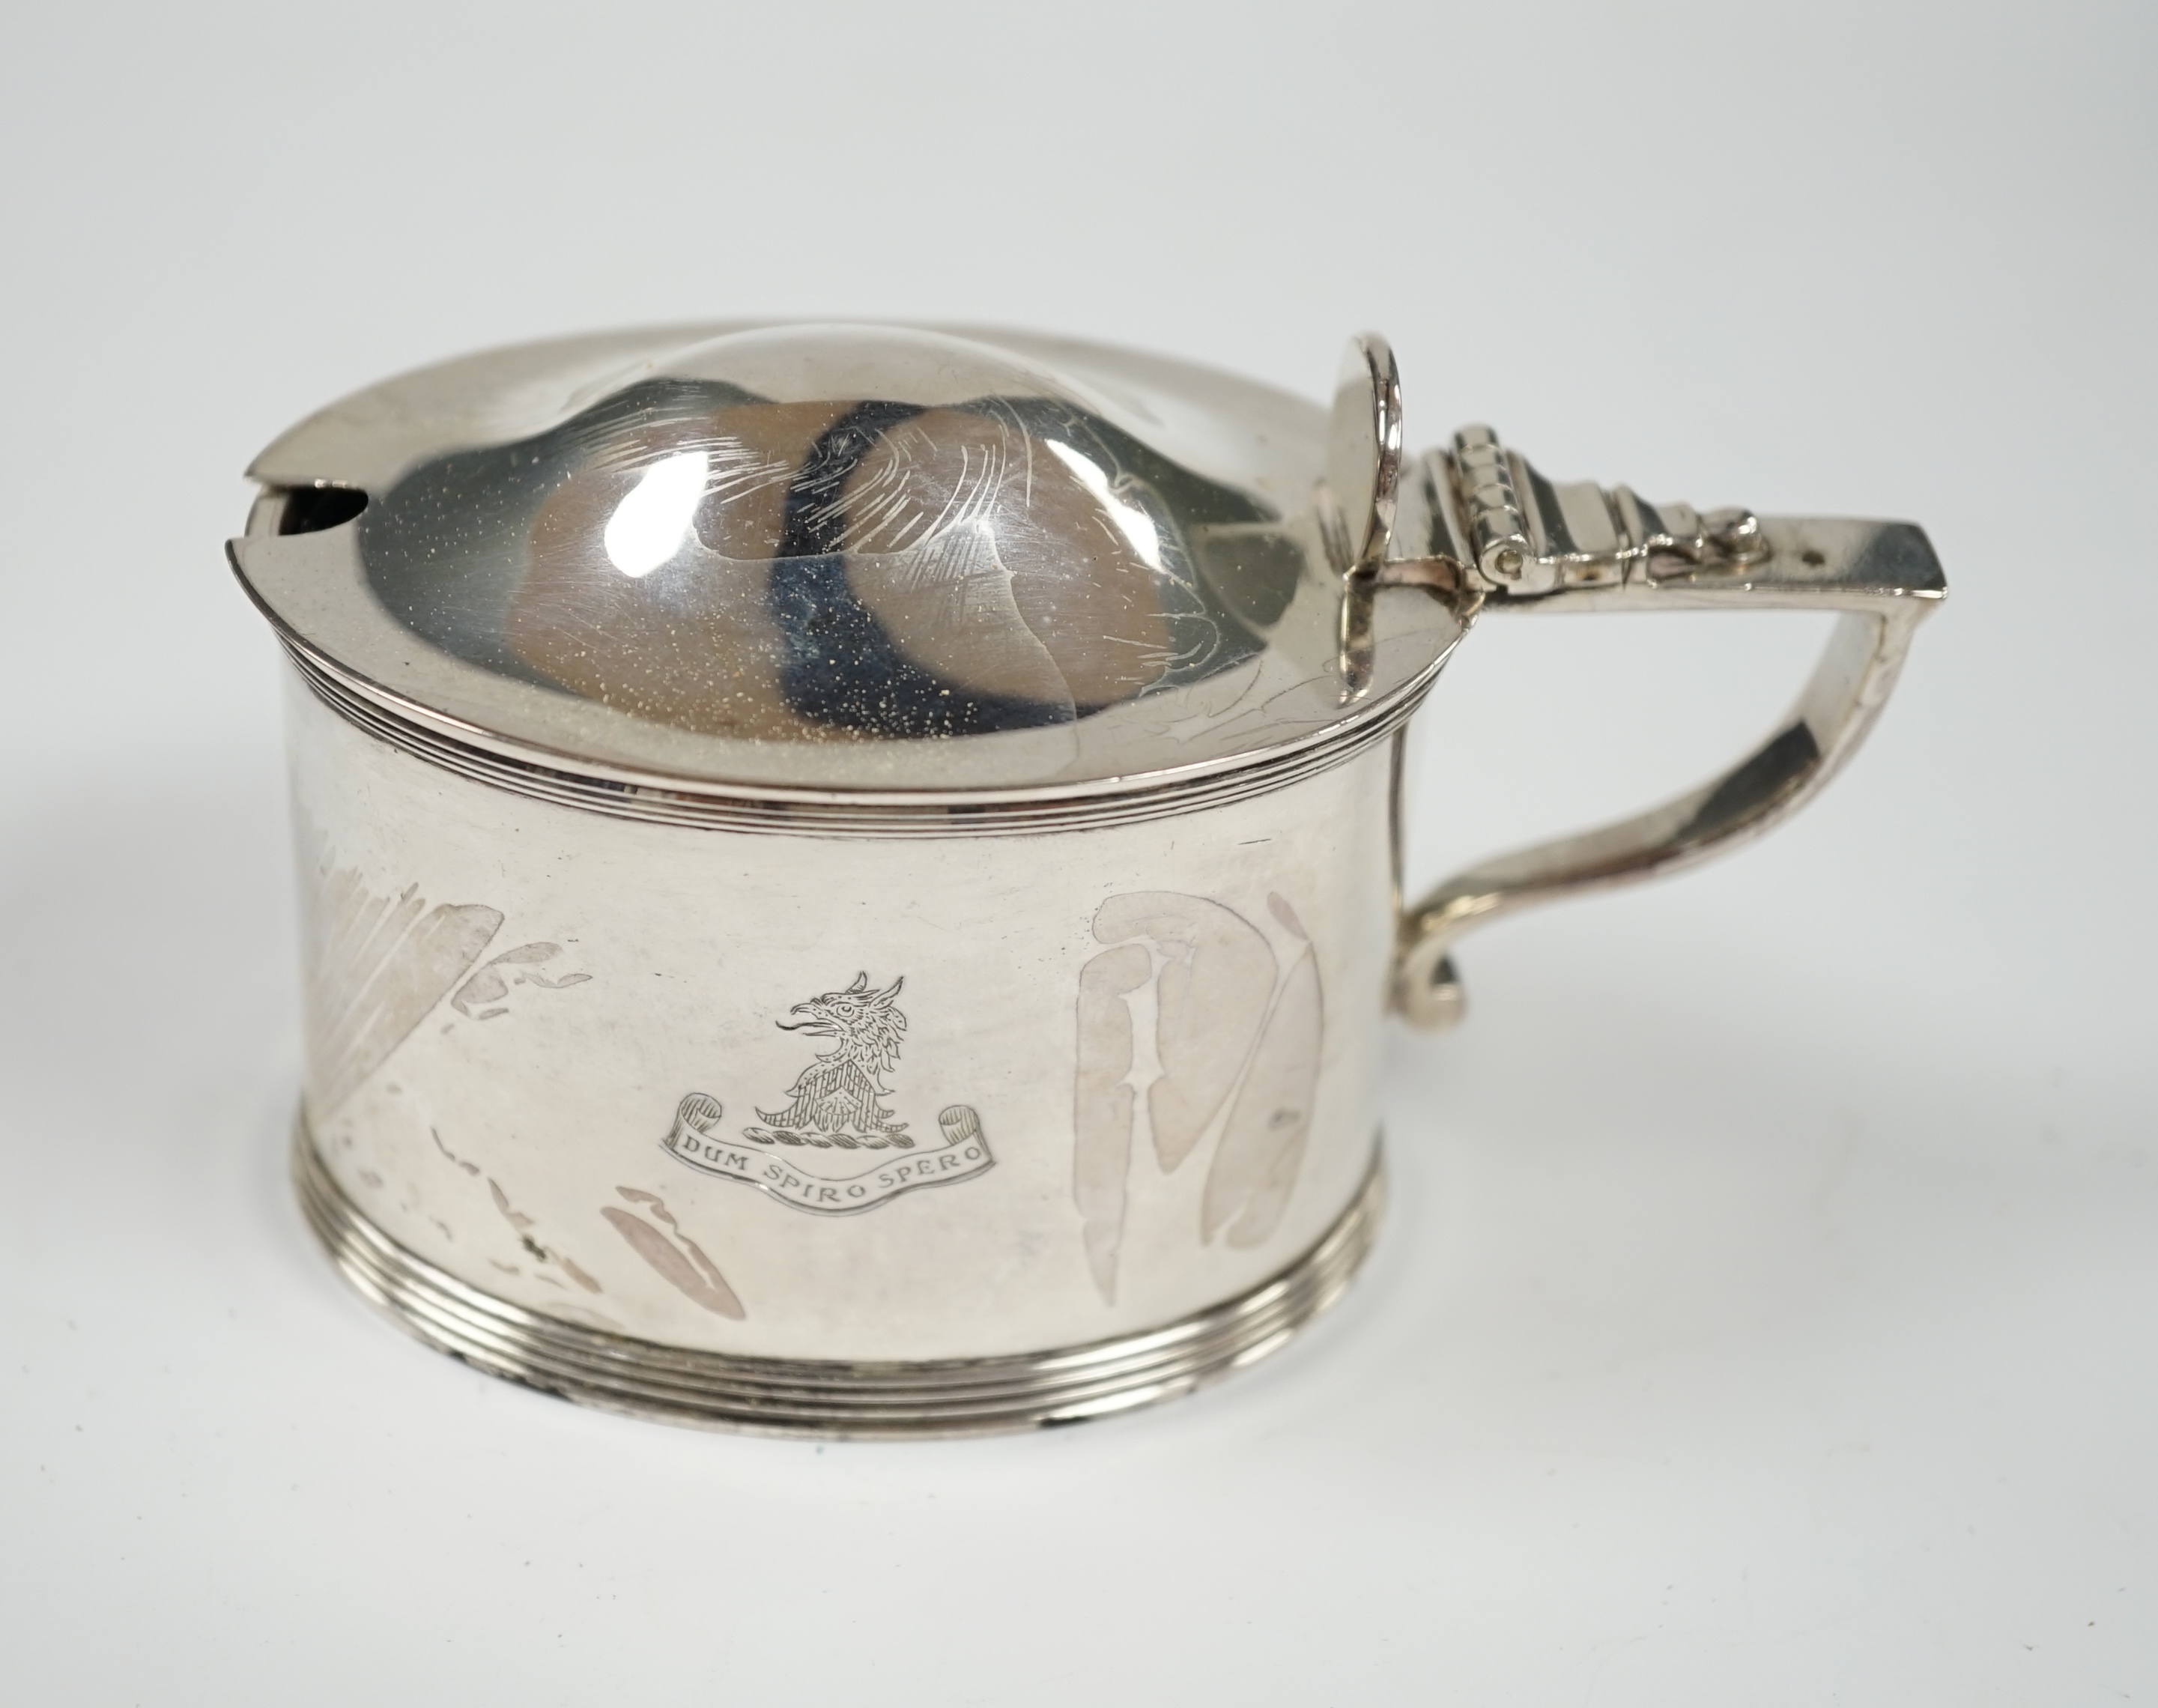 A late Victorian silver oval mustard pot, by William Barnard & Sons, London, 1881, length 10.5cm. Condition - fair